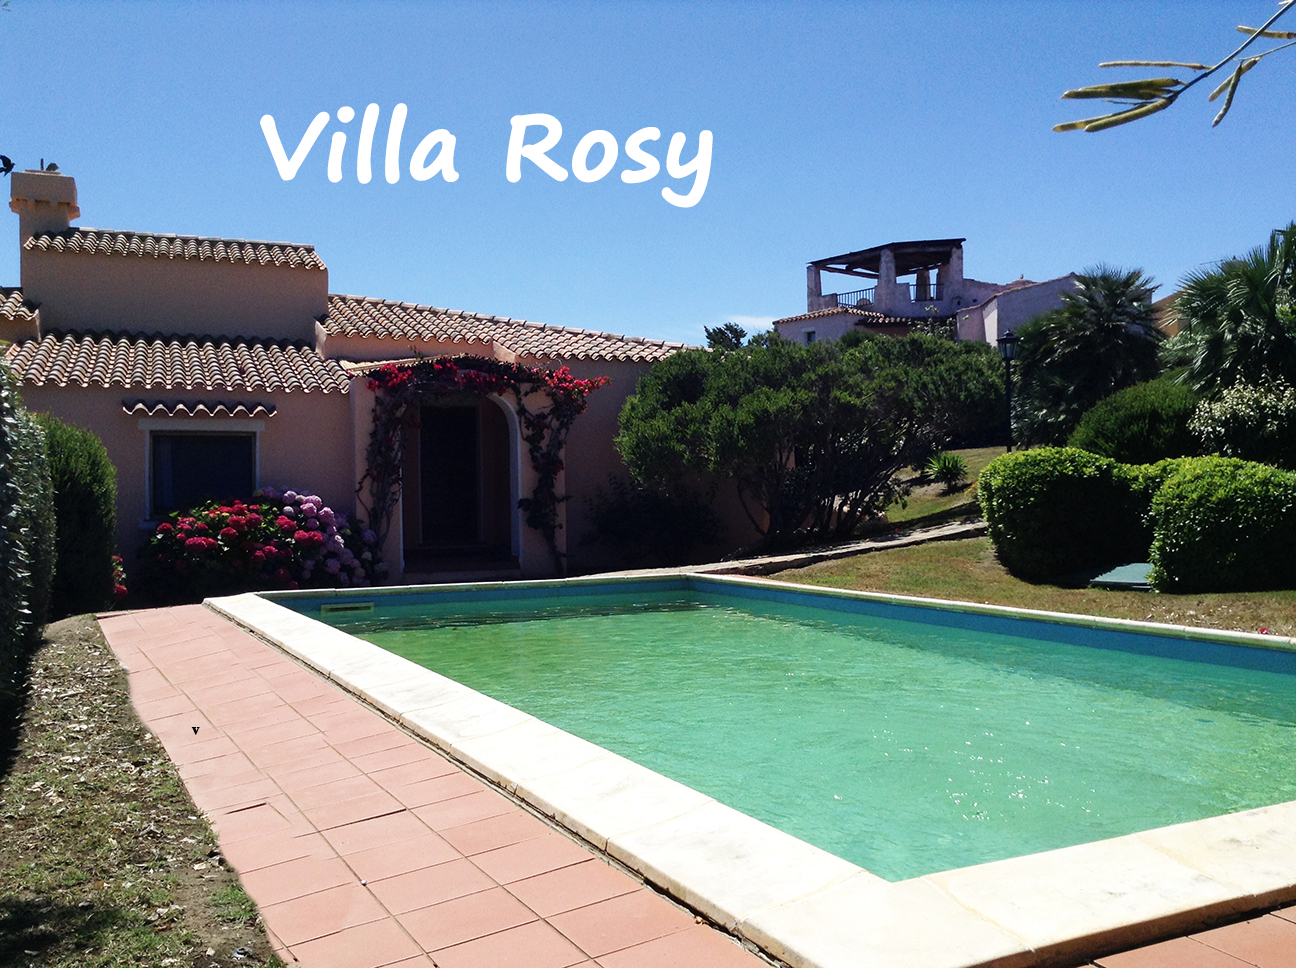 VILLA ROSY: DEIMDETACHED VILLA TO RENT FOR SUMMER HOLIDAYS. IT IS ON 2 LEVELS, WITH OWN PRIVATE GARDEN AND SWIMMING POOL.IT ACCOMMODATES TILL 6/7 PEOPLE,AND IT HAS 3 DOUBLE ROOMS (1 IS IN THE MEZANINE),1 BATHROOM, KITCHEN, DINING/LIVING ROOM, VERANDAS AND A TERRACE WITH SEA OVERVIEW!